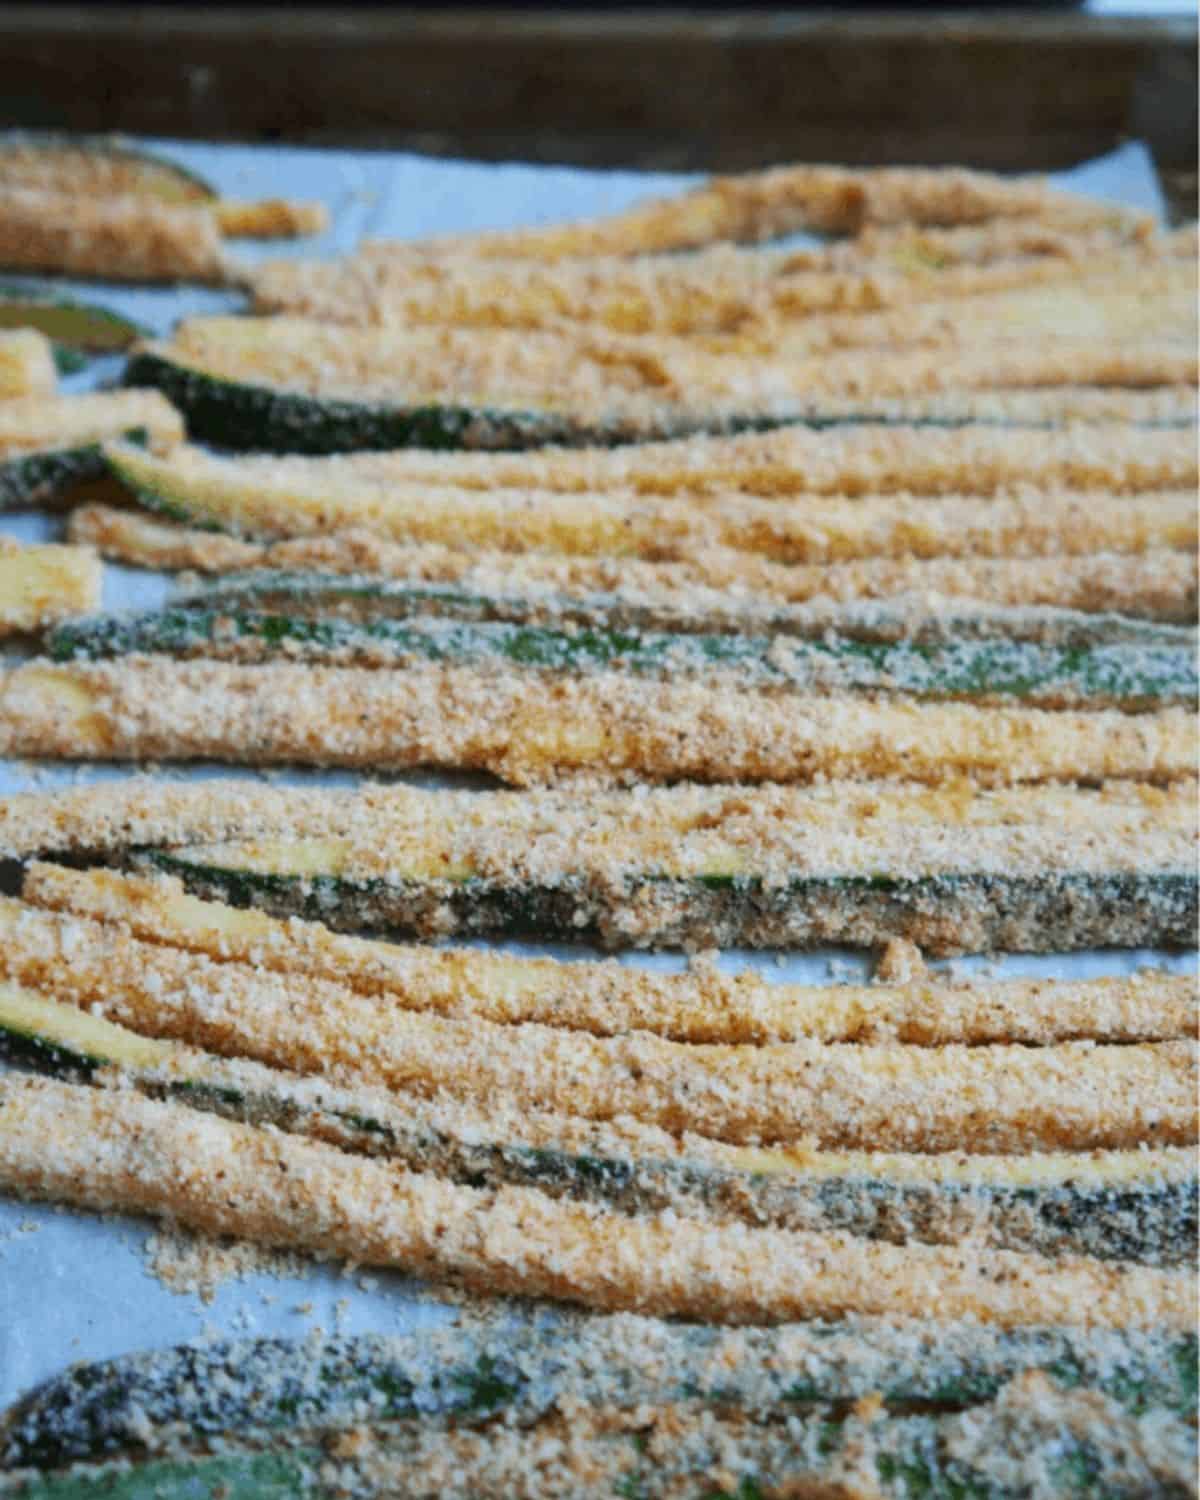 Side shot of the uncooked fries that are coated in parmesan cheese arranged on a baking sheet.